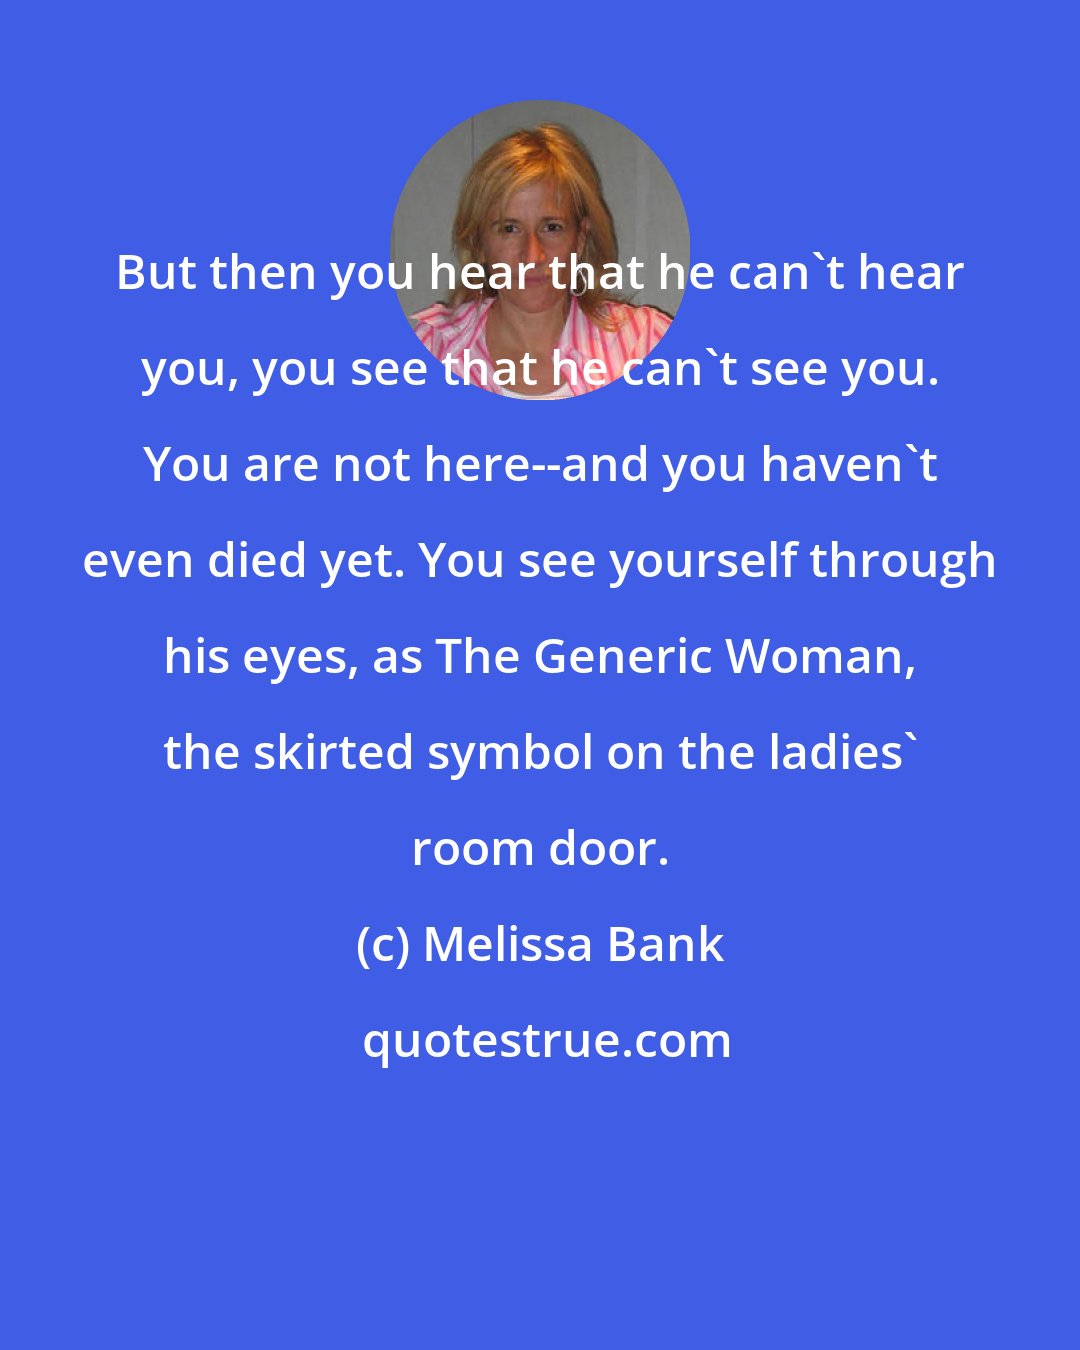 Melissa Bank: But then you hear that he can't hear you, you see that he can't see you. You are not here--and you haven't even died yet. You see yourself through his eyes, as The Generic Woman, the skirted symbol on the ladies' room door.